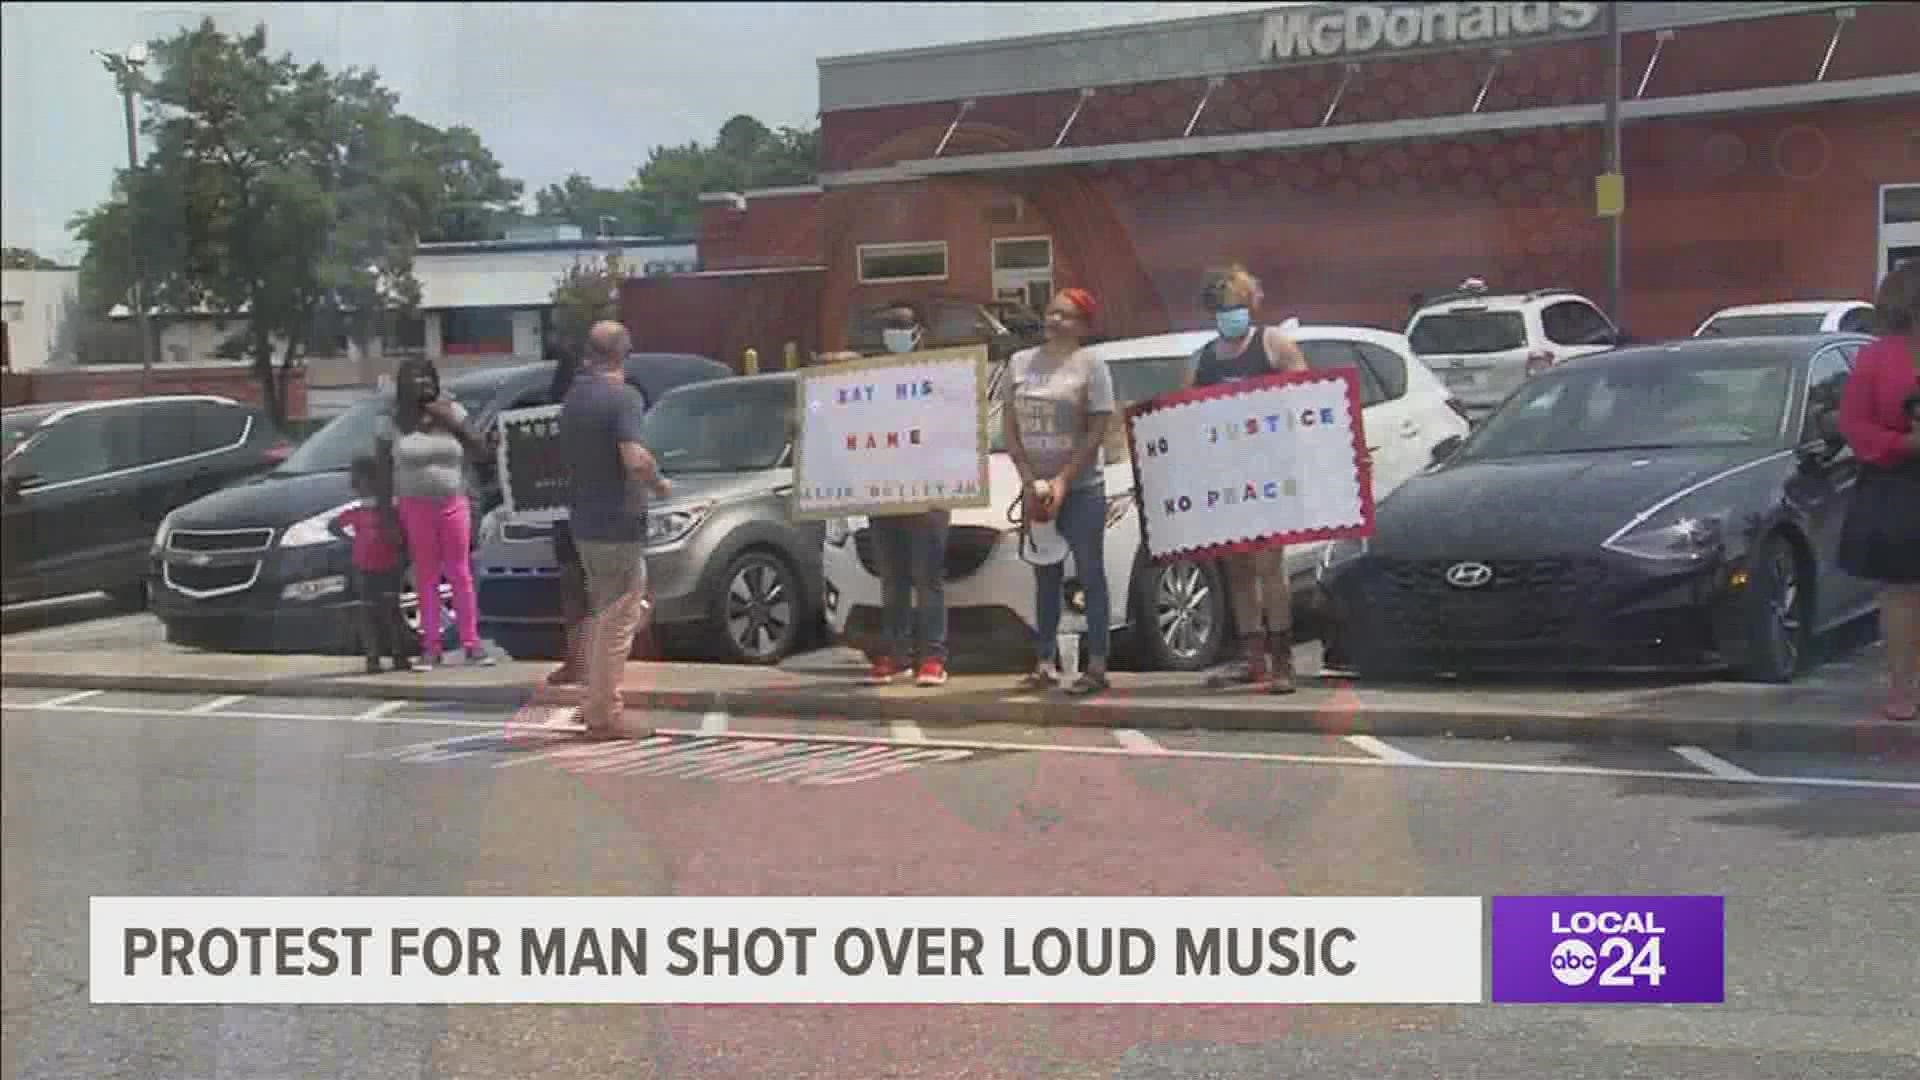 Saturday, activists gathered at the gas station to block the pumps and play their own music in protest.